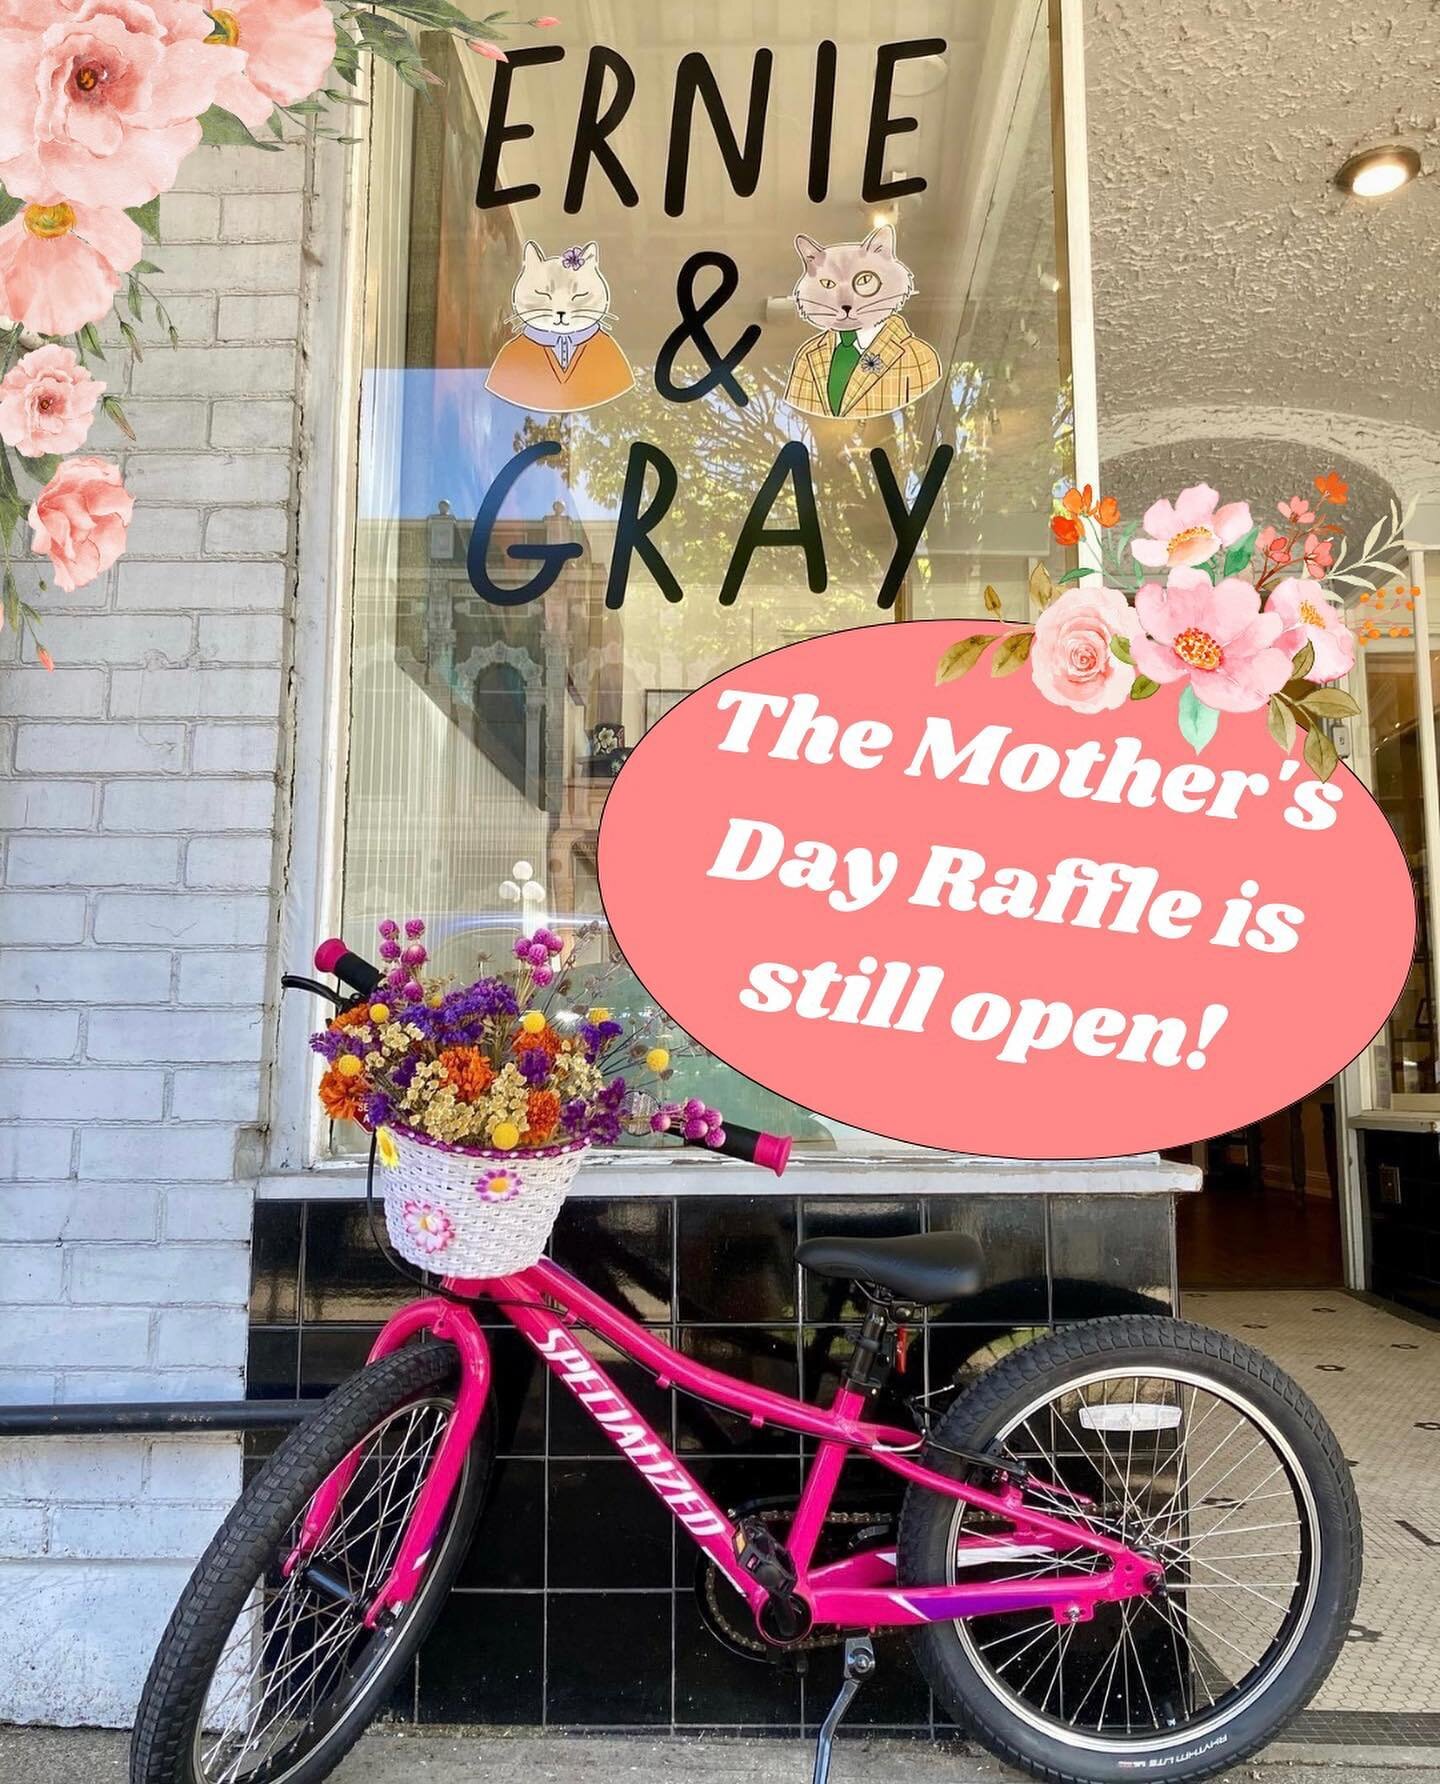 Is your name in our Mother&rsquo;s Day raffle yet?

If you haven&rsquo;t heard, we&rsquo;re teaming up with @ernieandgray @perle_skincare and @thehomesteadflowergarden to raffle off some very cool prizes, perfect for gifting to your favorite mother i